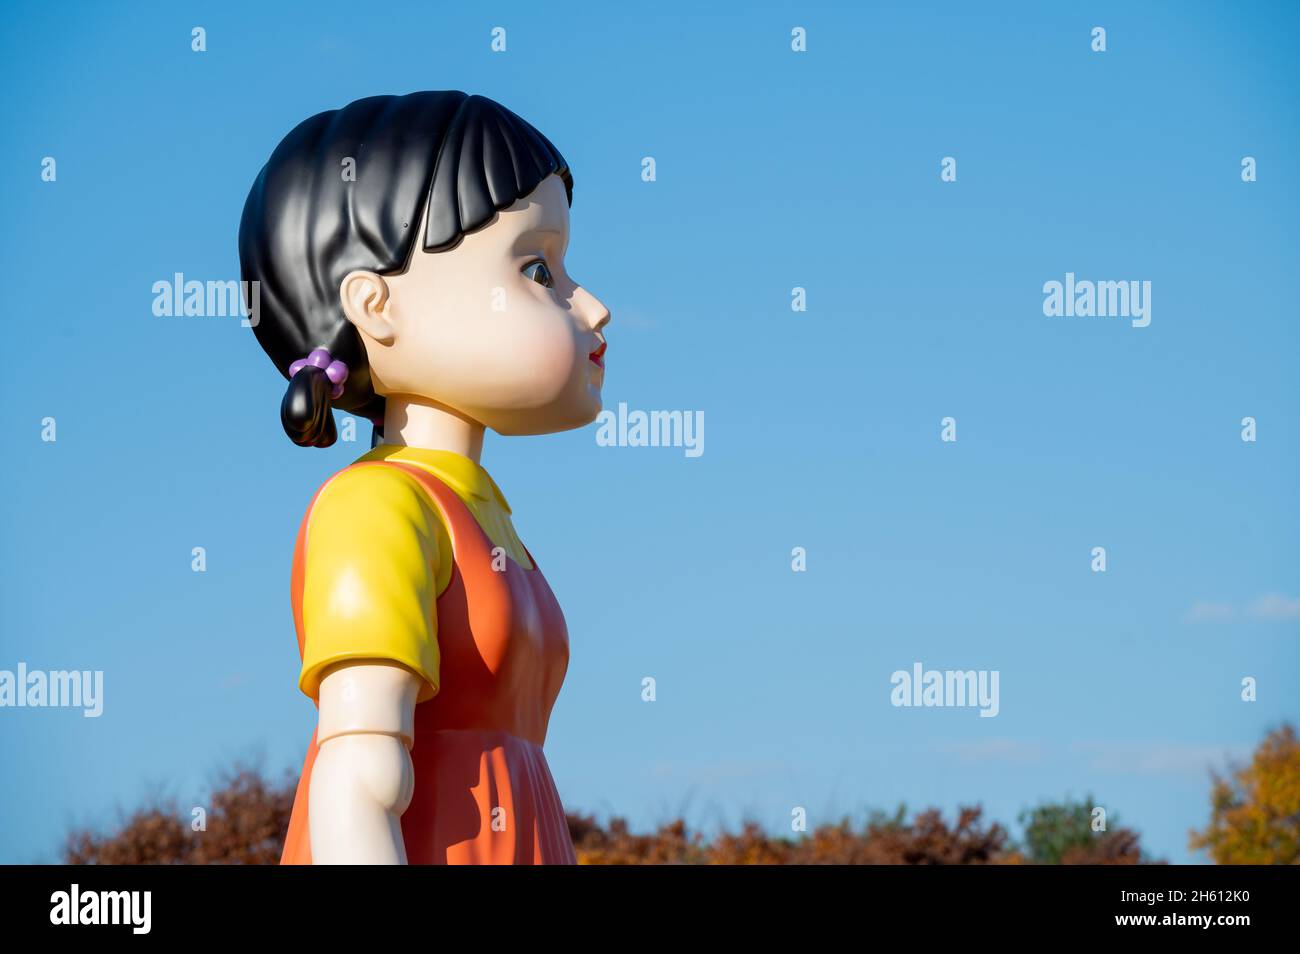 Seoul, South Korea - November 2021: The giant doll from Netflix original series 'Squid Game' at the Olympic Park in Seoul. Stock Photo